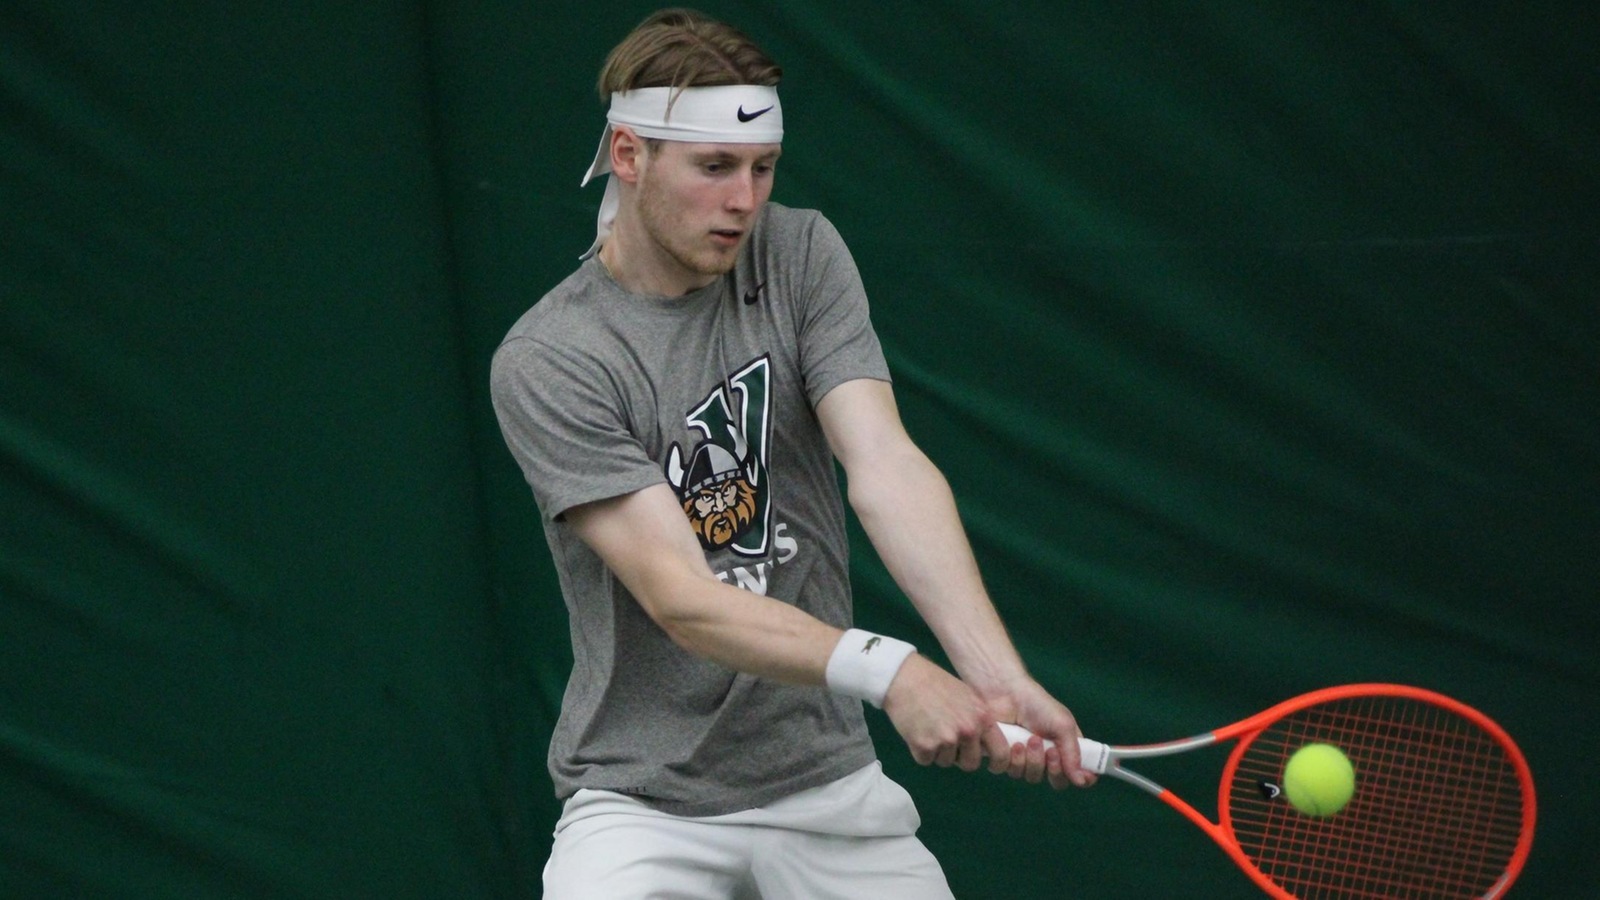 Cleveland State Men’s Tennis Remains Perfect In #HLTennis Play With Win Over Chicago State